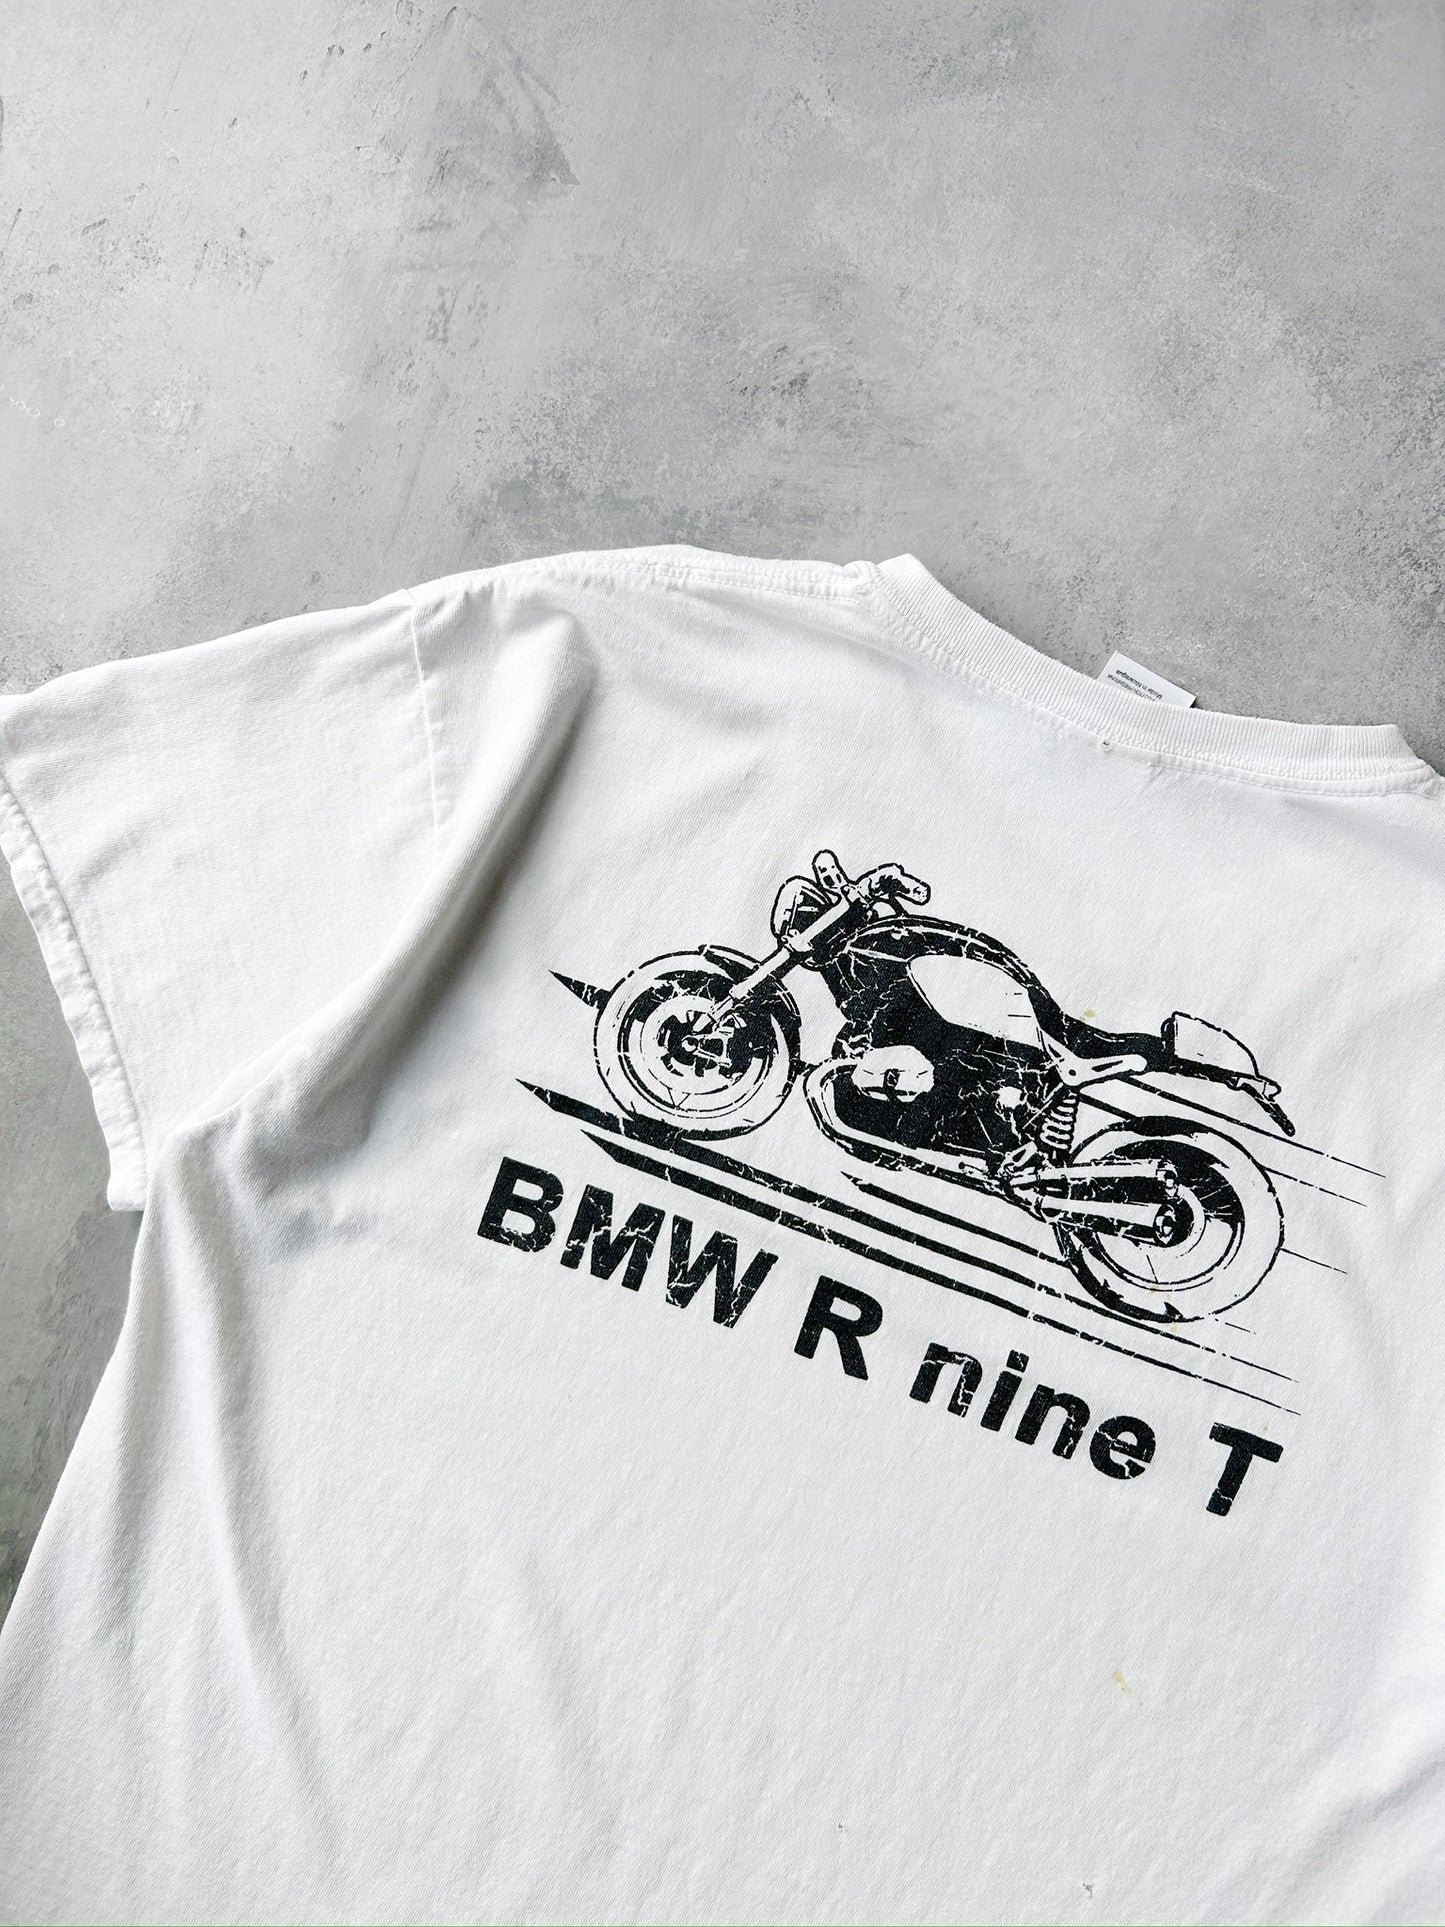 BMW Motorcycles T-Shirt 2010's - Large